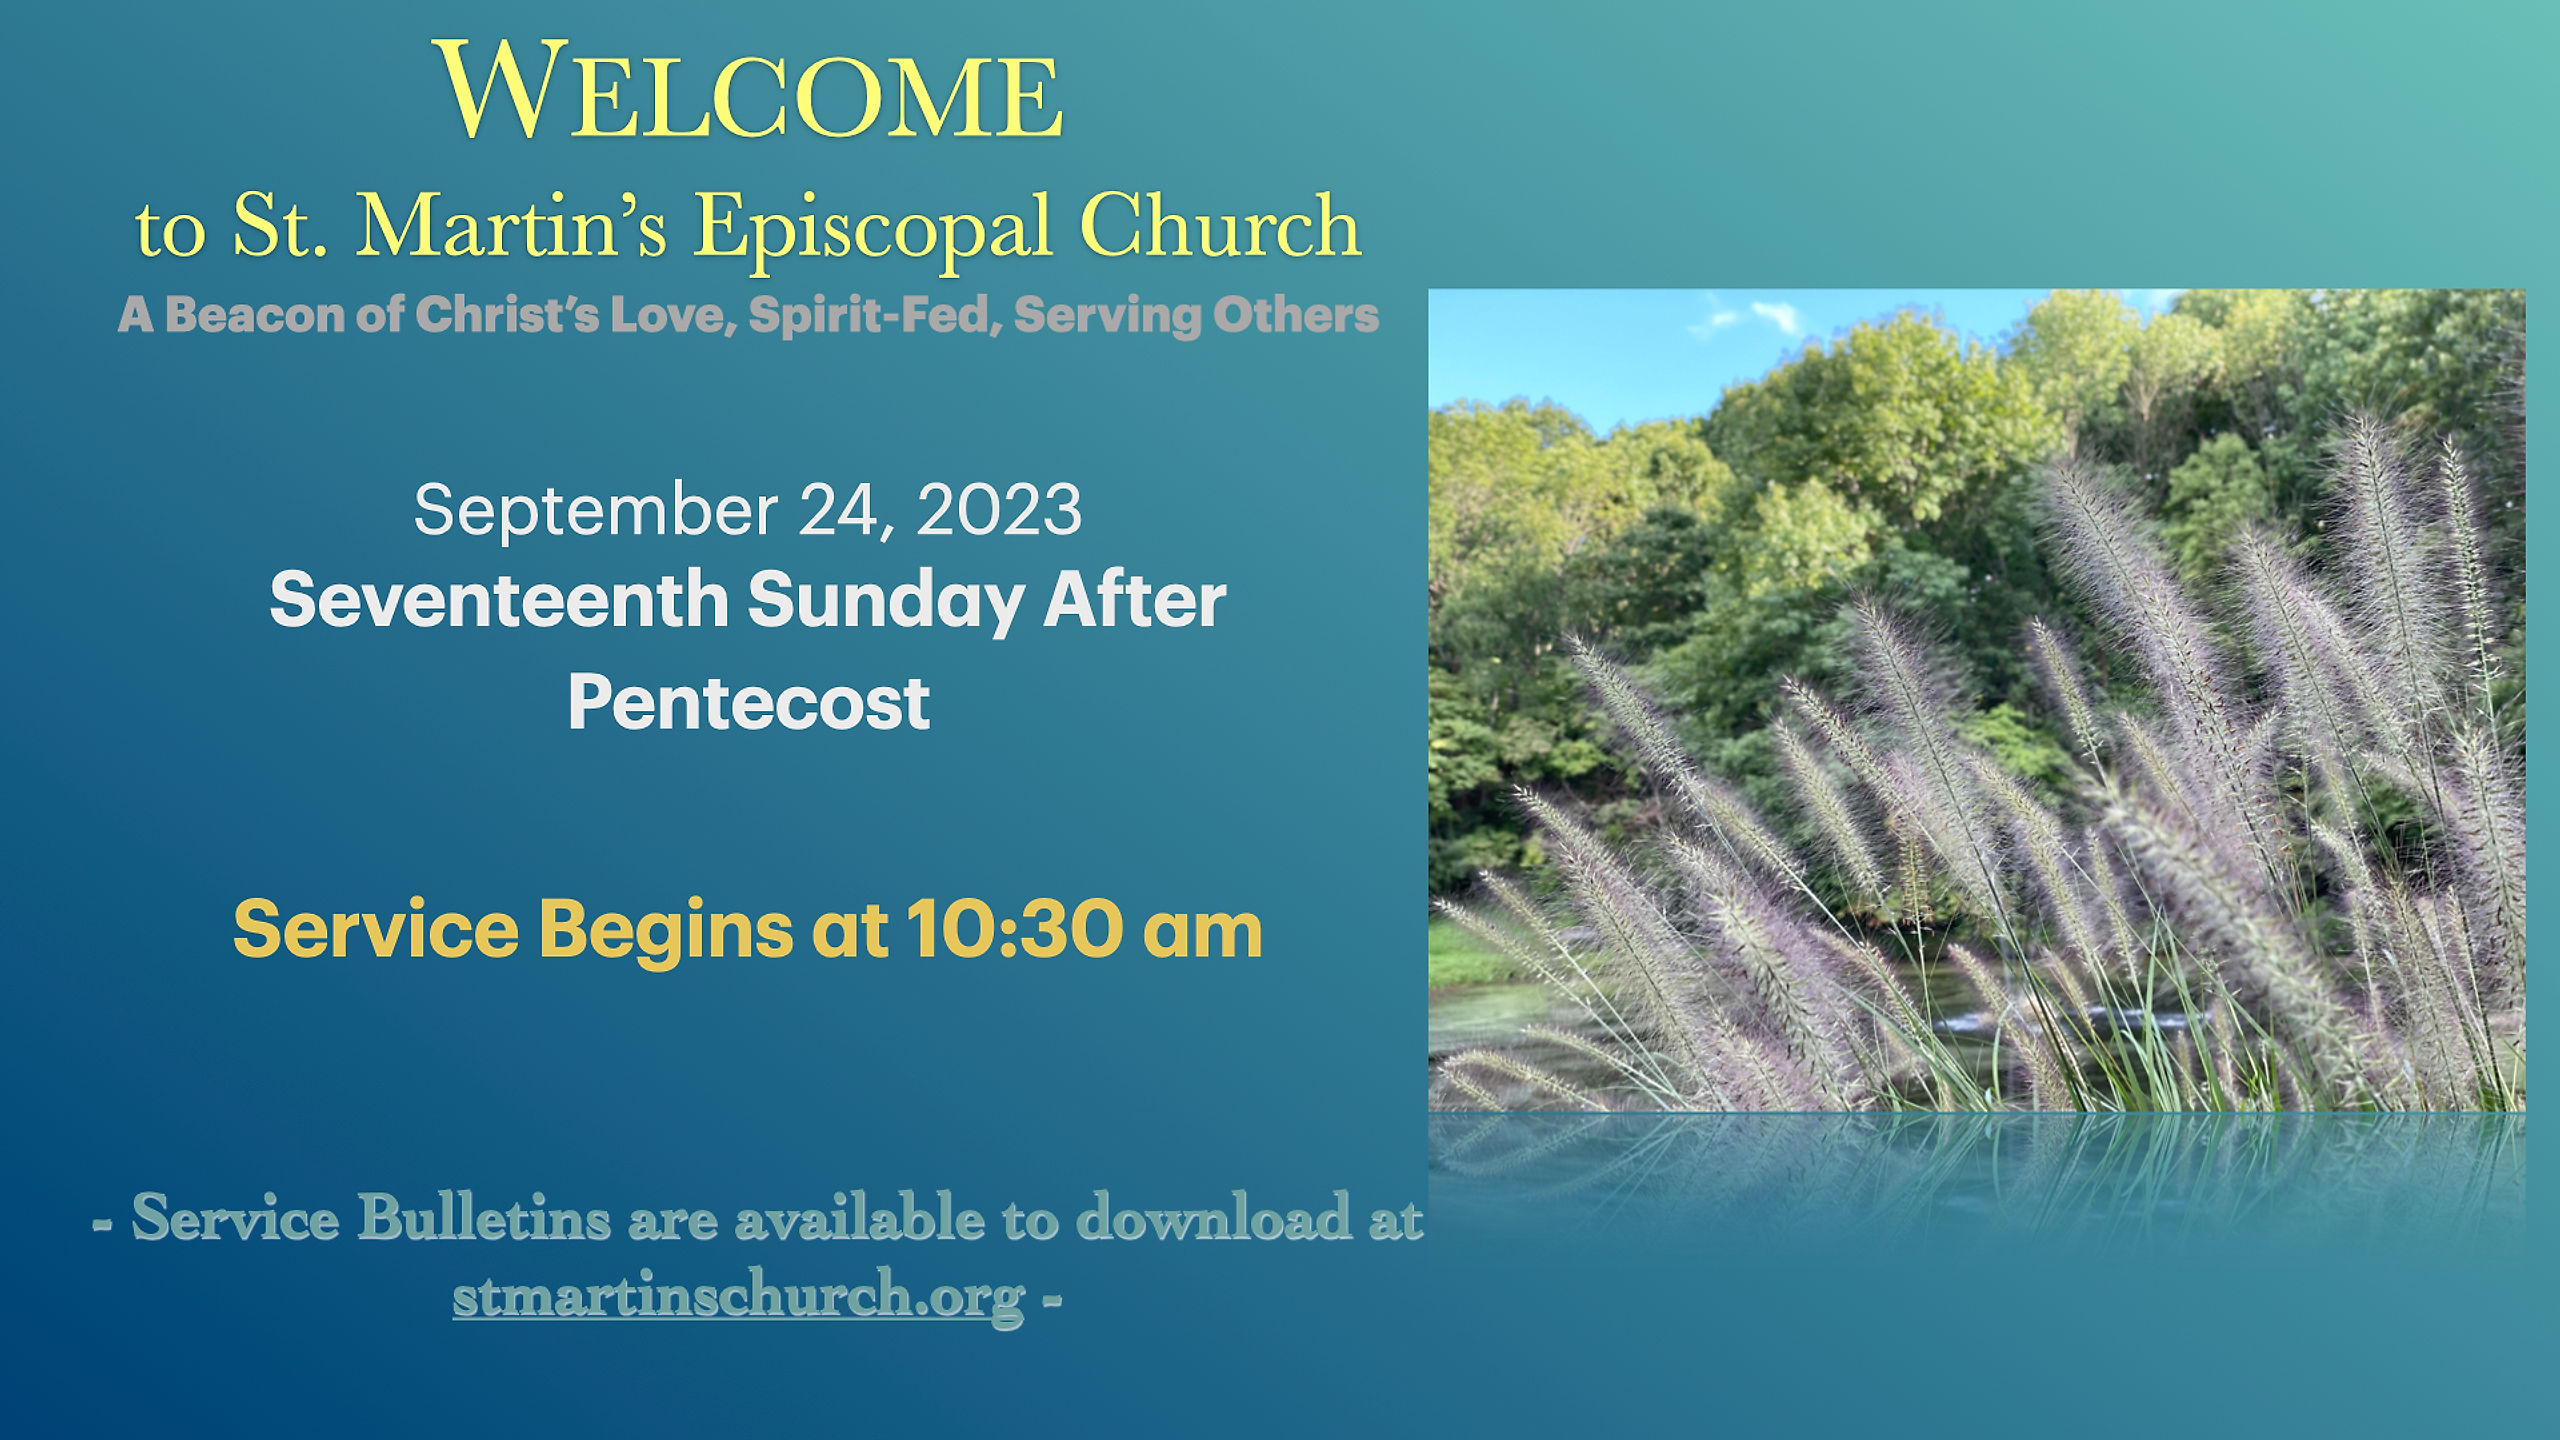 In-Person and Livestream Broadcast of Holy Eucharist Service for the 17th Sunday after Pentecost